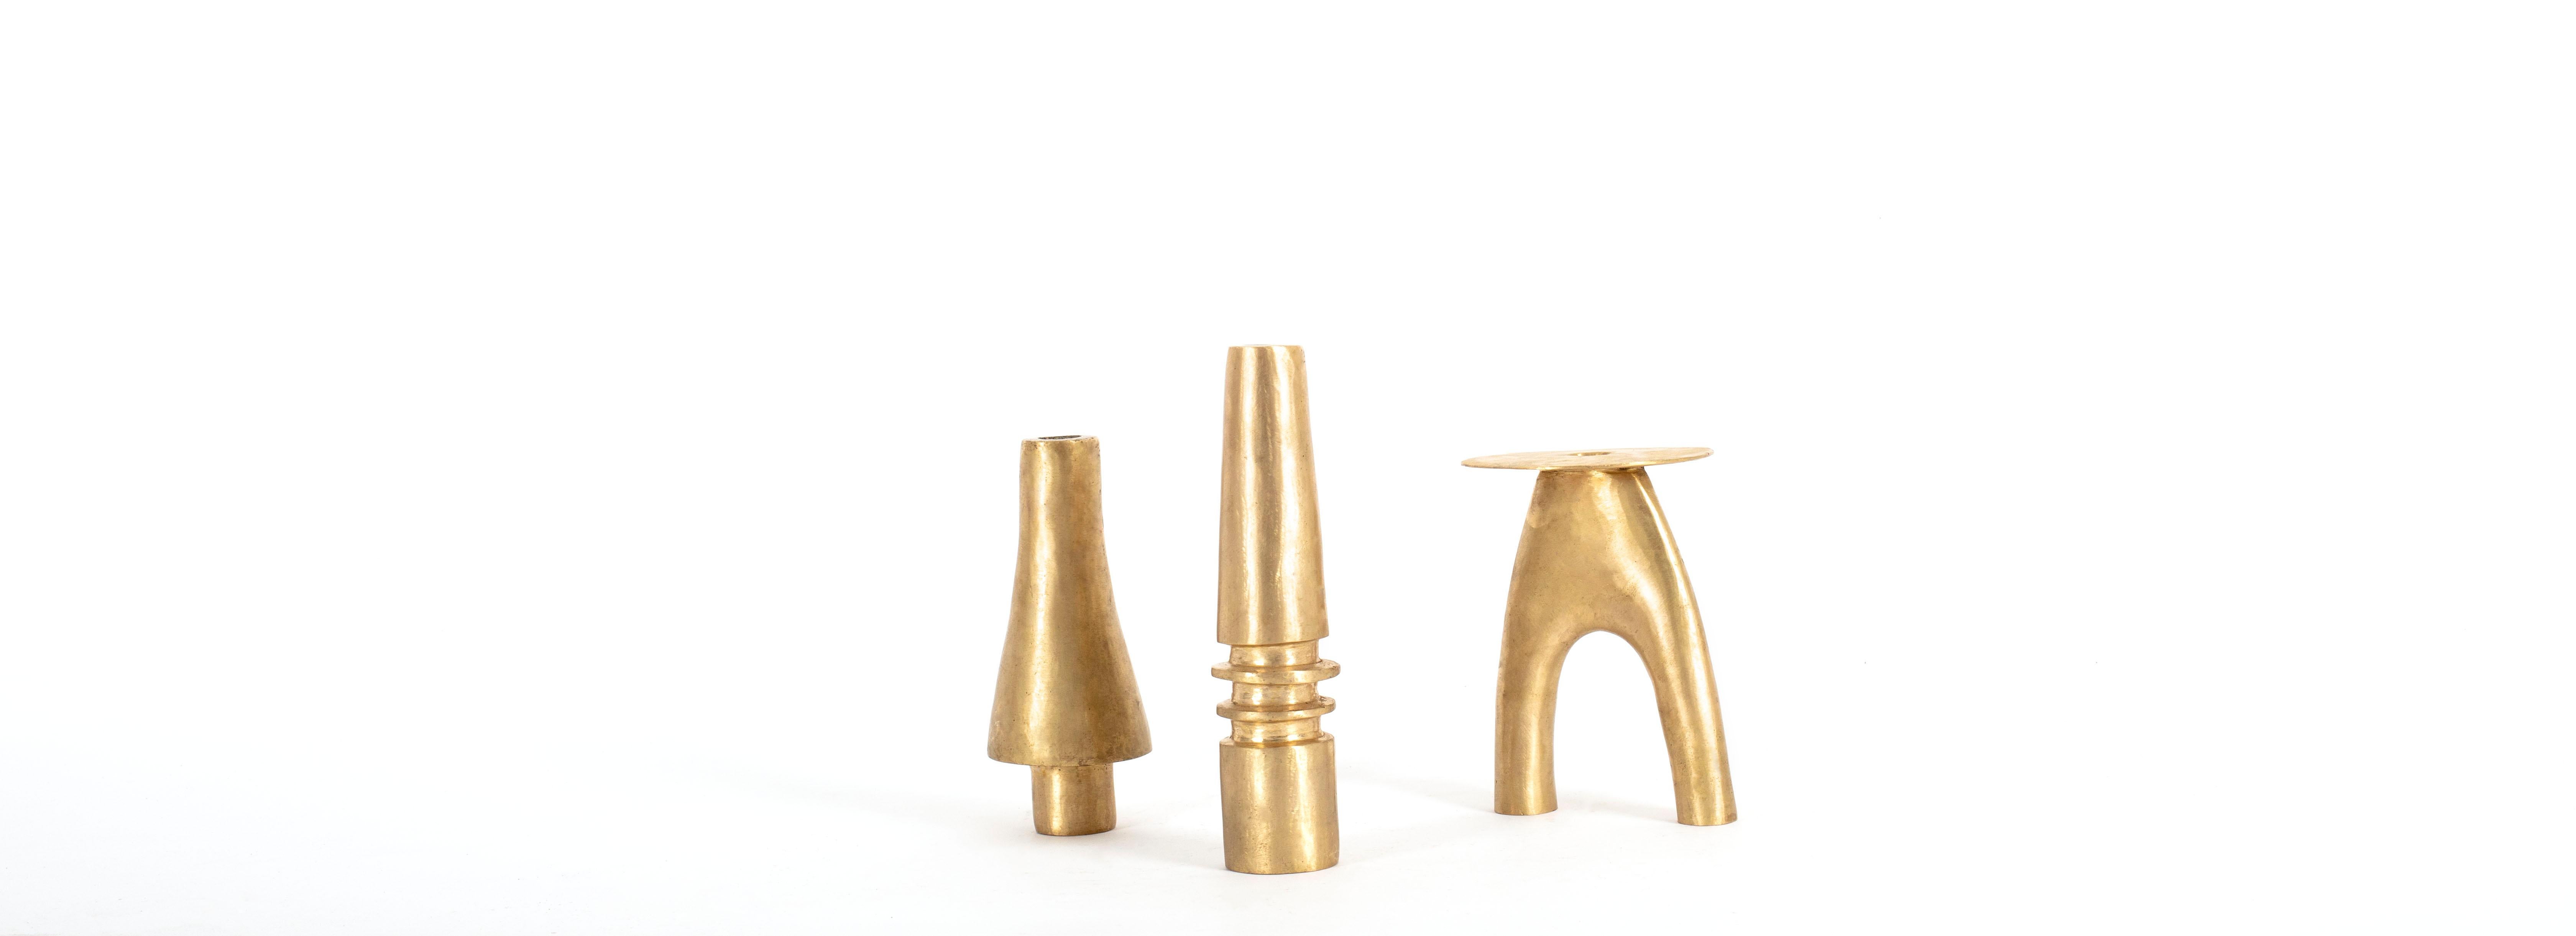 Burkinabe Bronze Lobi Candleholders by Pia Chevalier and Ambre Jarno